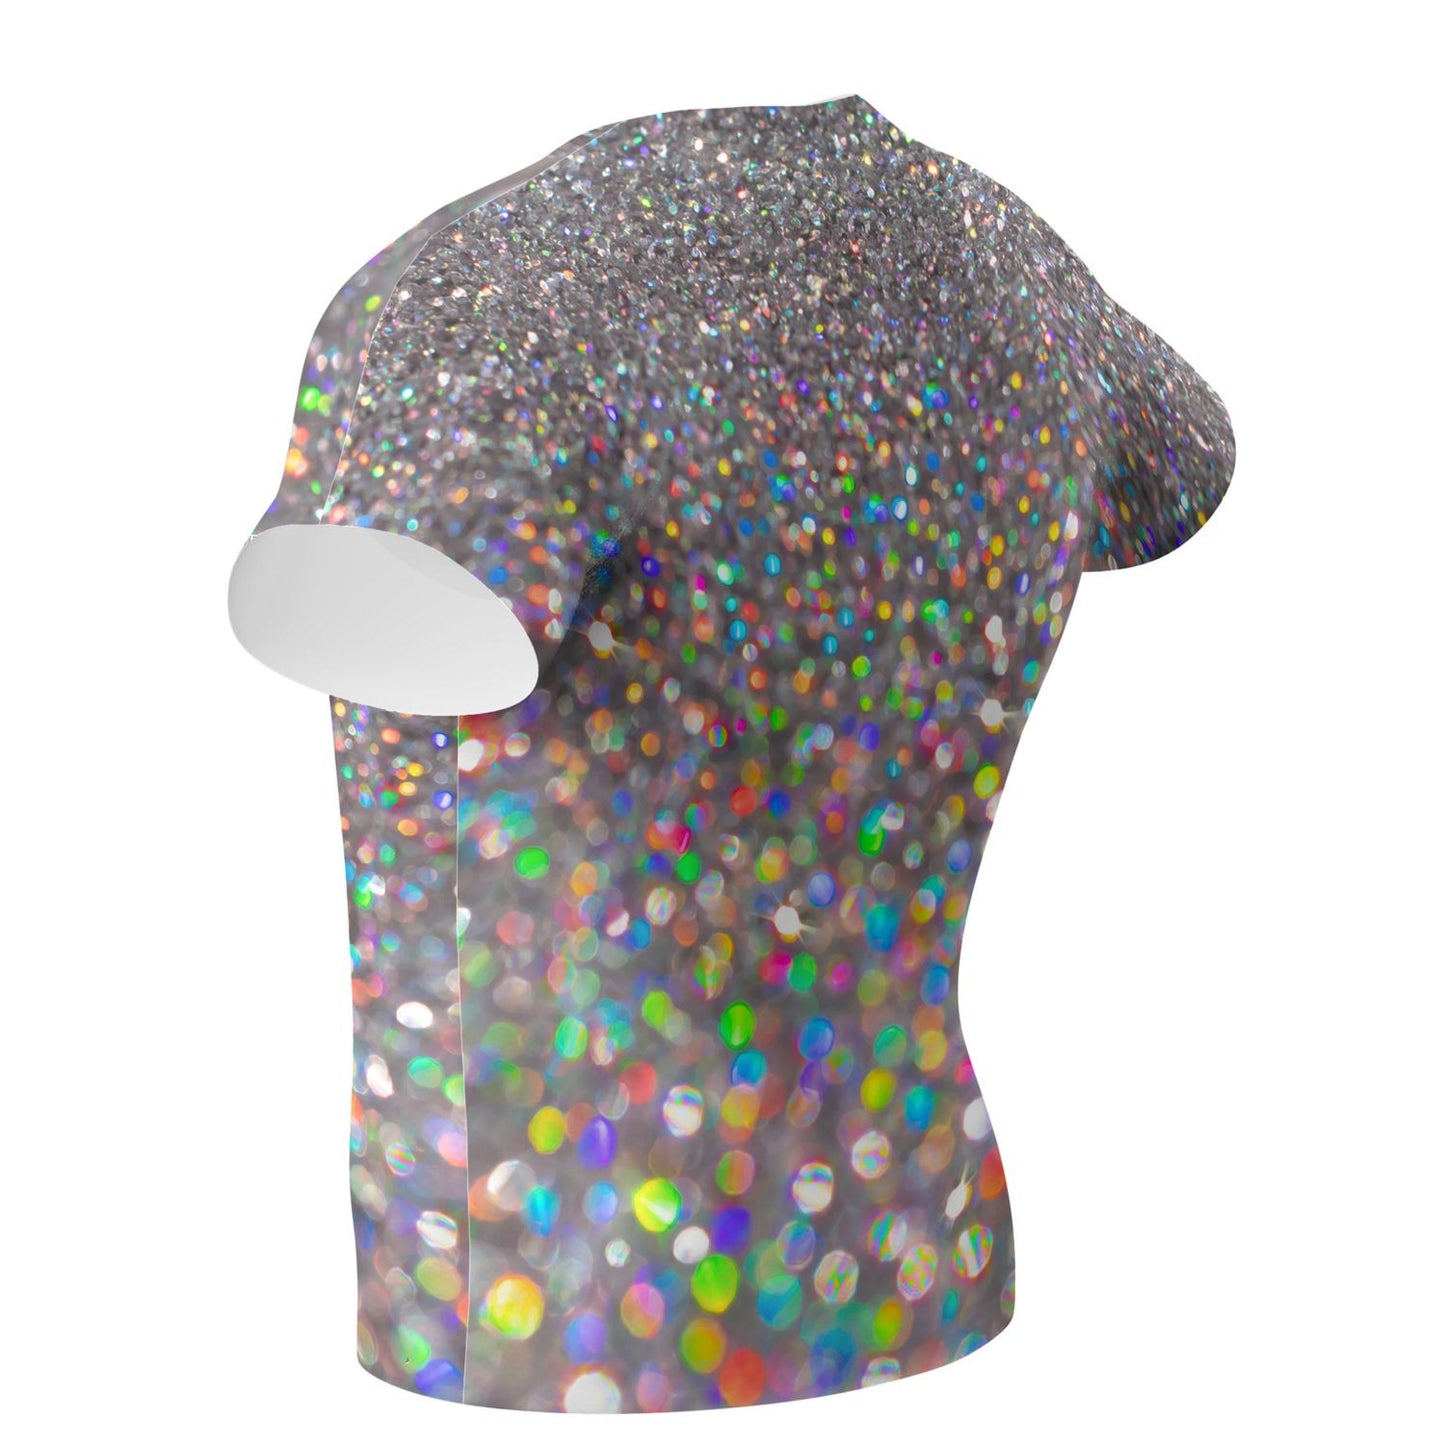 Dipped in Glitter Performance Shirt